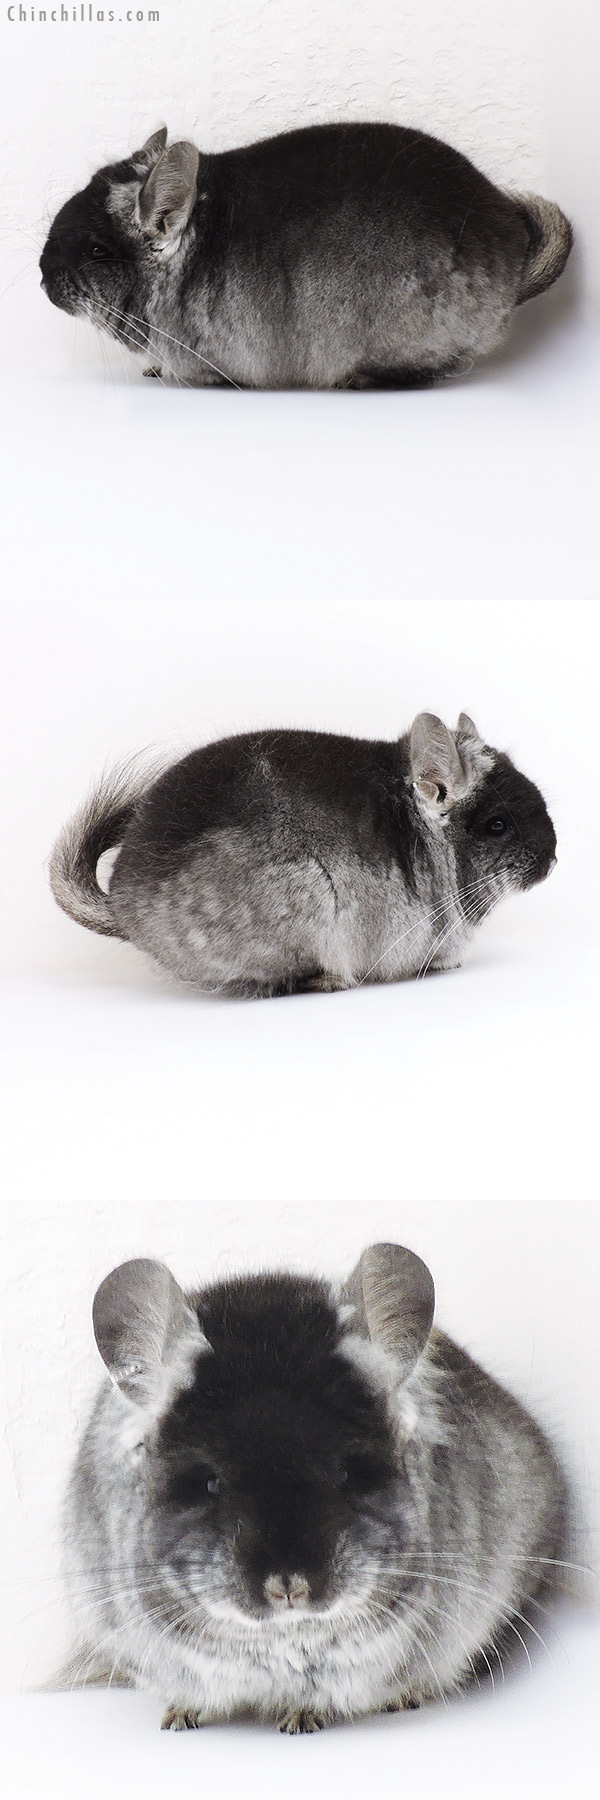 Chinchilla or related item offered for sale or export on Chinchillas.com - 19224 Brevi Type Black Velvet  Royal Persian Angora Male Chinchilla